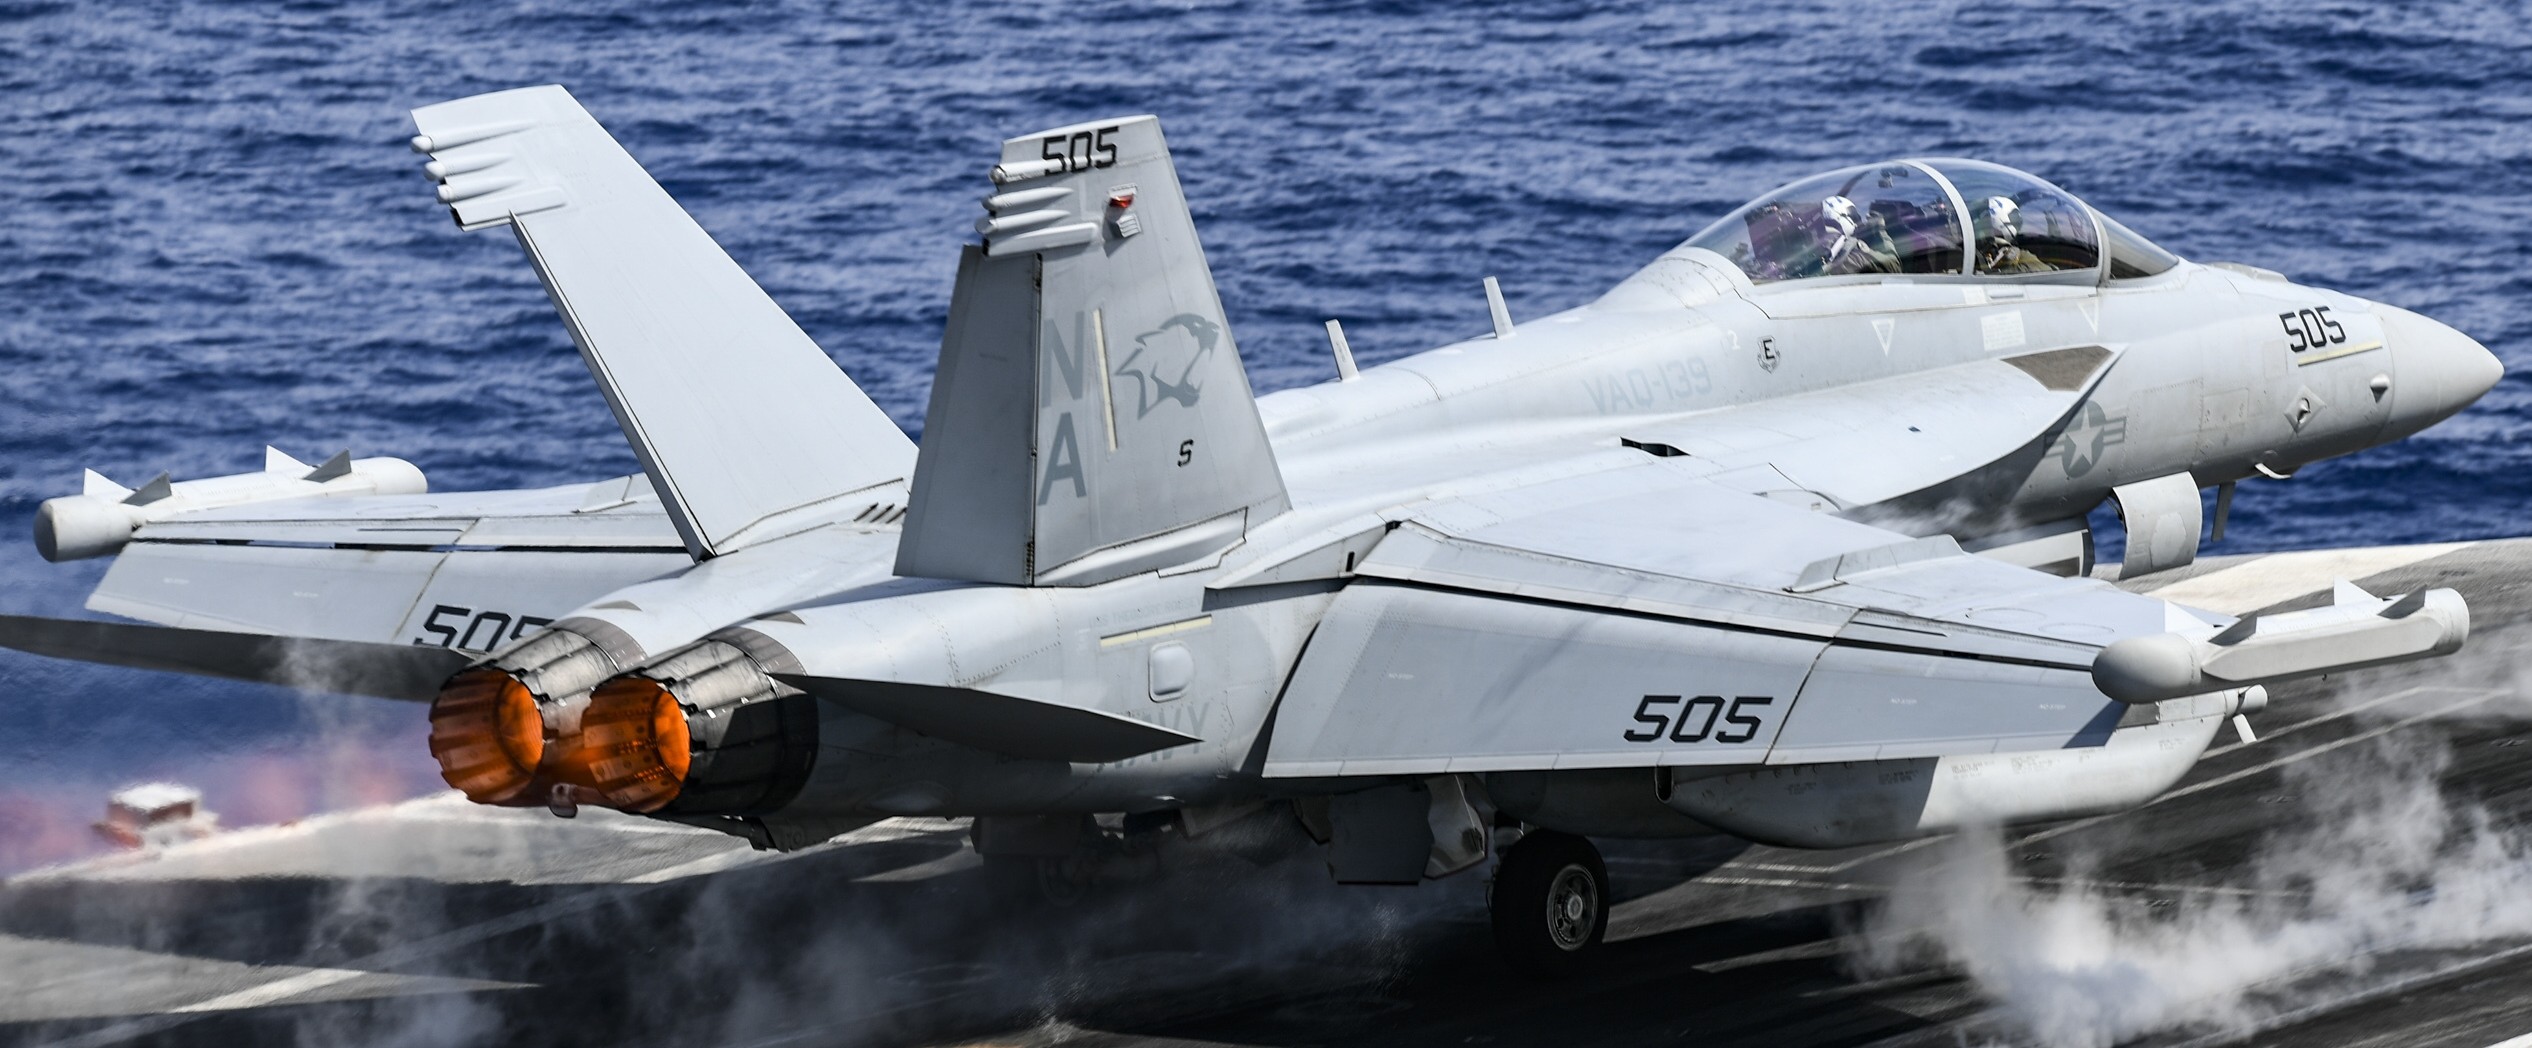 vaq-139 cougars electronic attack squadron us navy ea-18g growler cvw-17 uss theodore roosevelt cvn-71 105